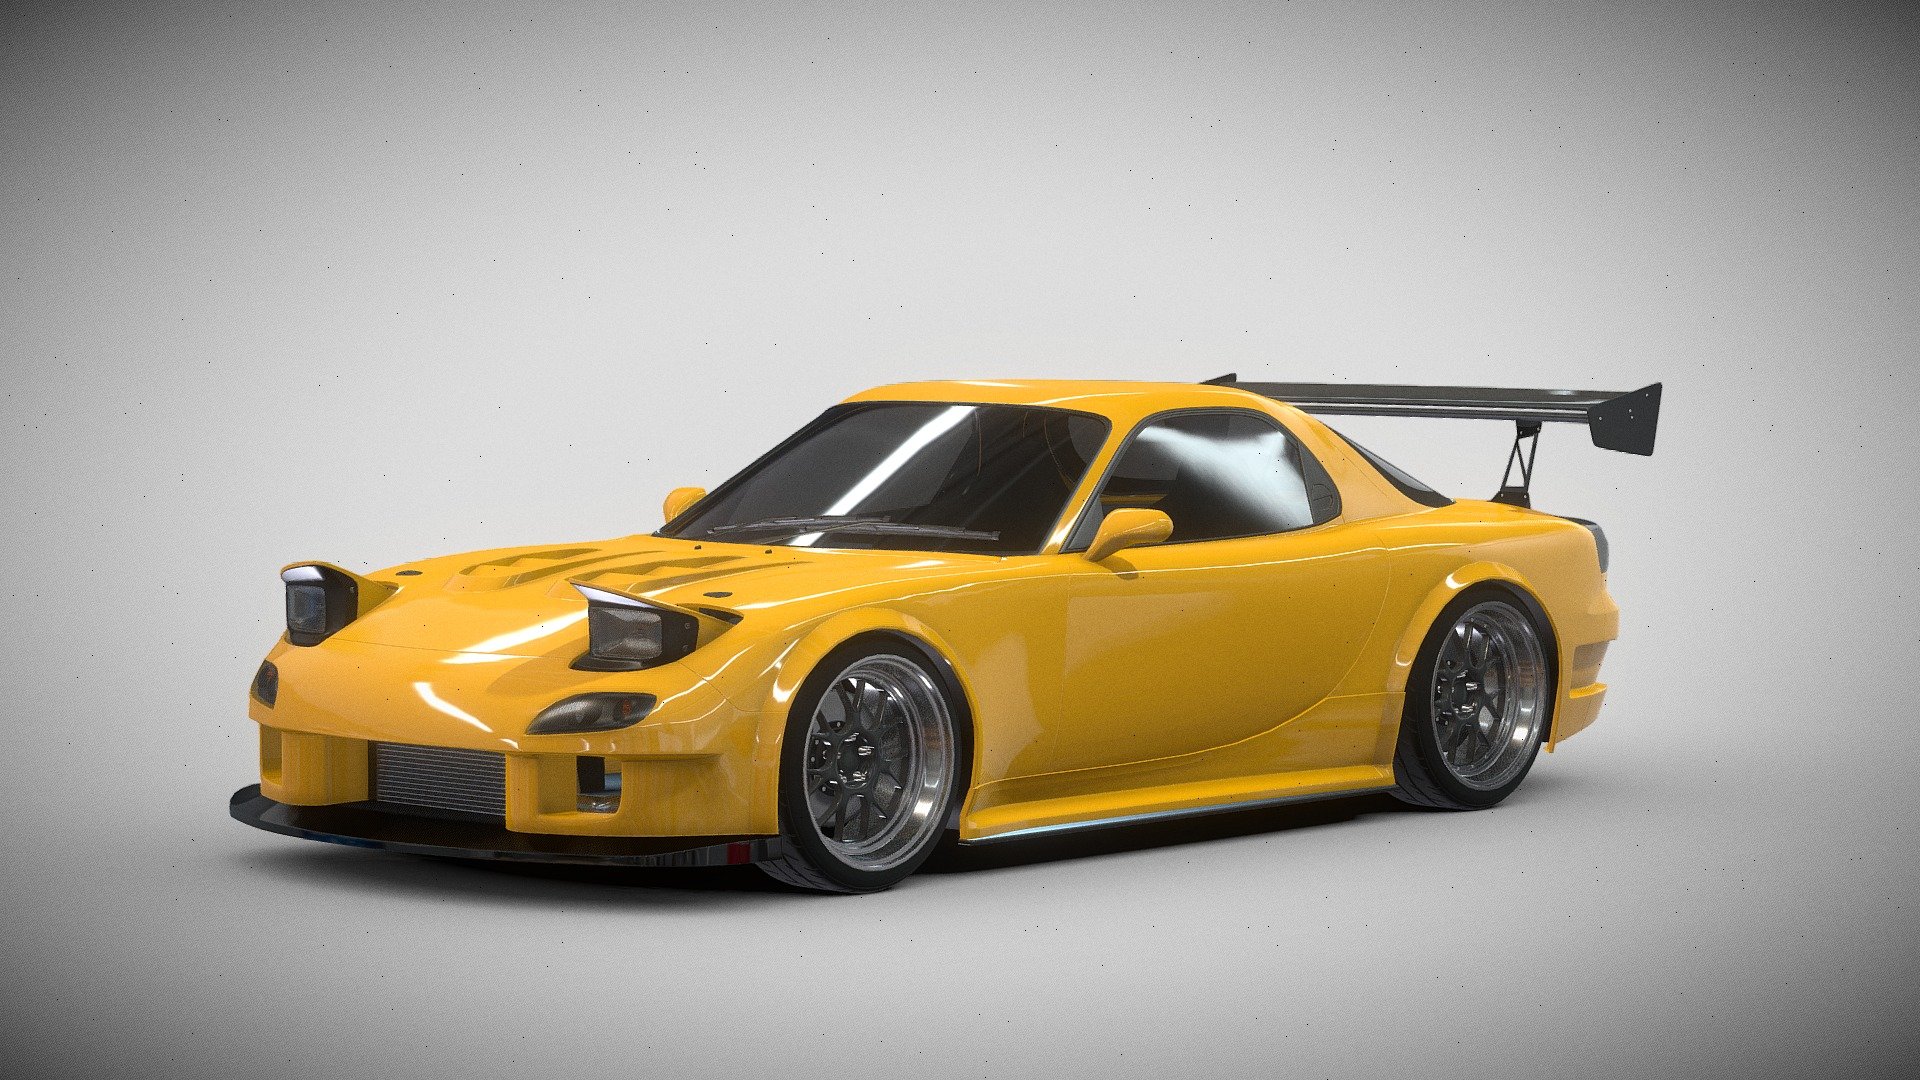 This is a 3D model of the Mazda RX-7 FD made in Japan which was produced from 1991 to 2002. I made an RX-7 model with my own bodykit modifications, taking several real world modifications as my reference source.

I made it directly in Blender version 4.0.

For the materials, there are several of me who use procedural shaders which are only available specifically in Blender. So some materials will not be the same as those in the picture, especially the headlights and tail lights. But overall the material will not change much as shown

Model render in Blender
 - Mazda RX-7 Custom - Buy Royalty Free 3D model by Naudaff3D 3d model